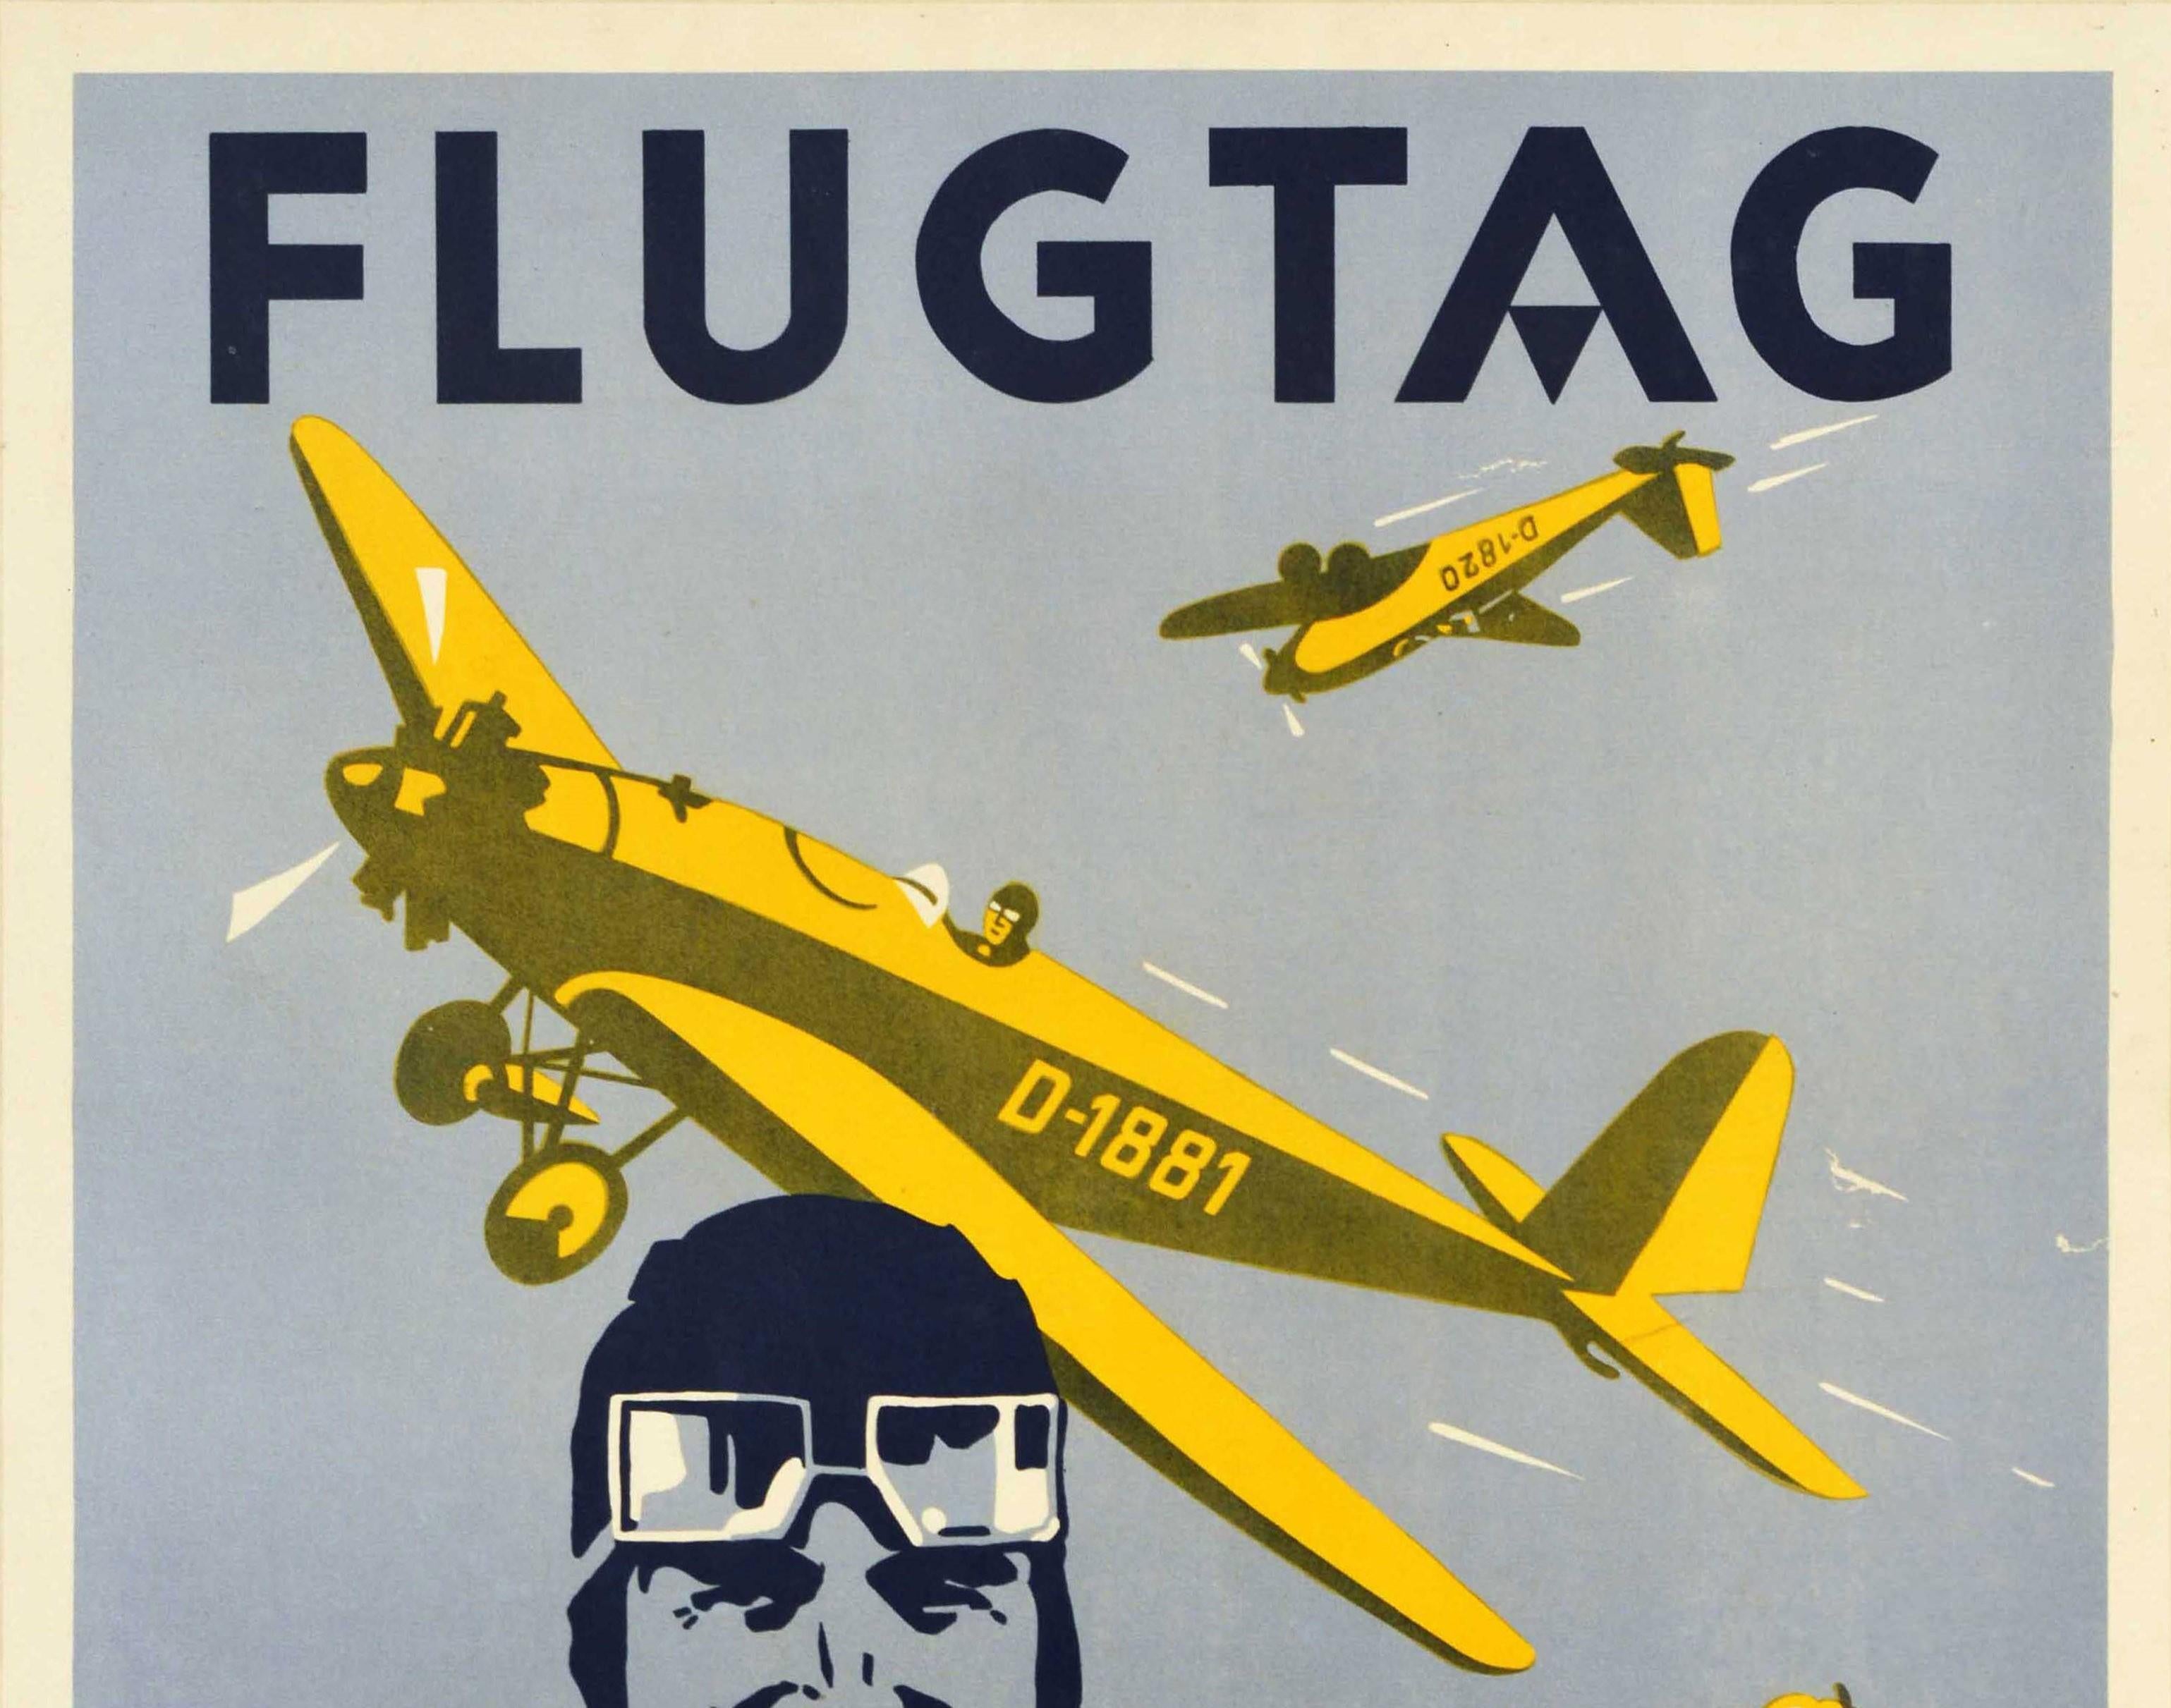 Original antique poster for the Flugtag Arbeitsgemeinschaft Bayerischer Piloten / Flight Day Working Group of Bavarian Pilots featuring a great design depicting a smiling pilot in parachute uniform with propeller planes in the background flying by